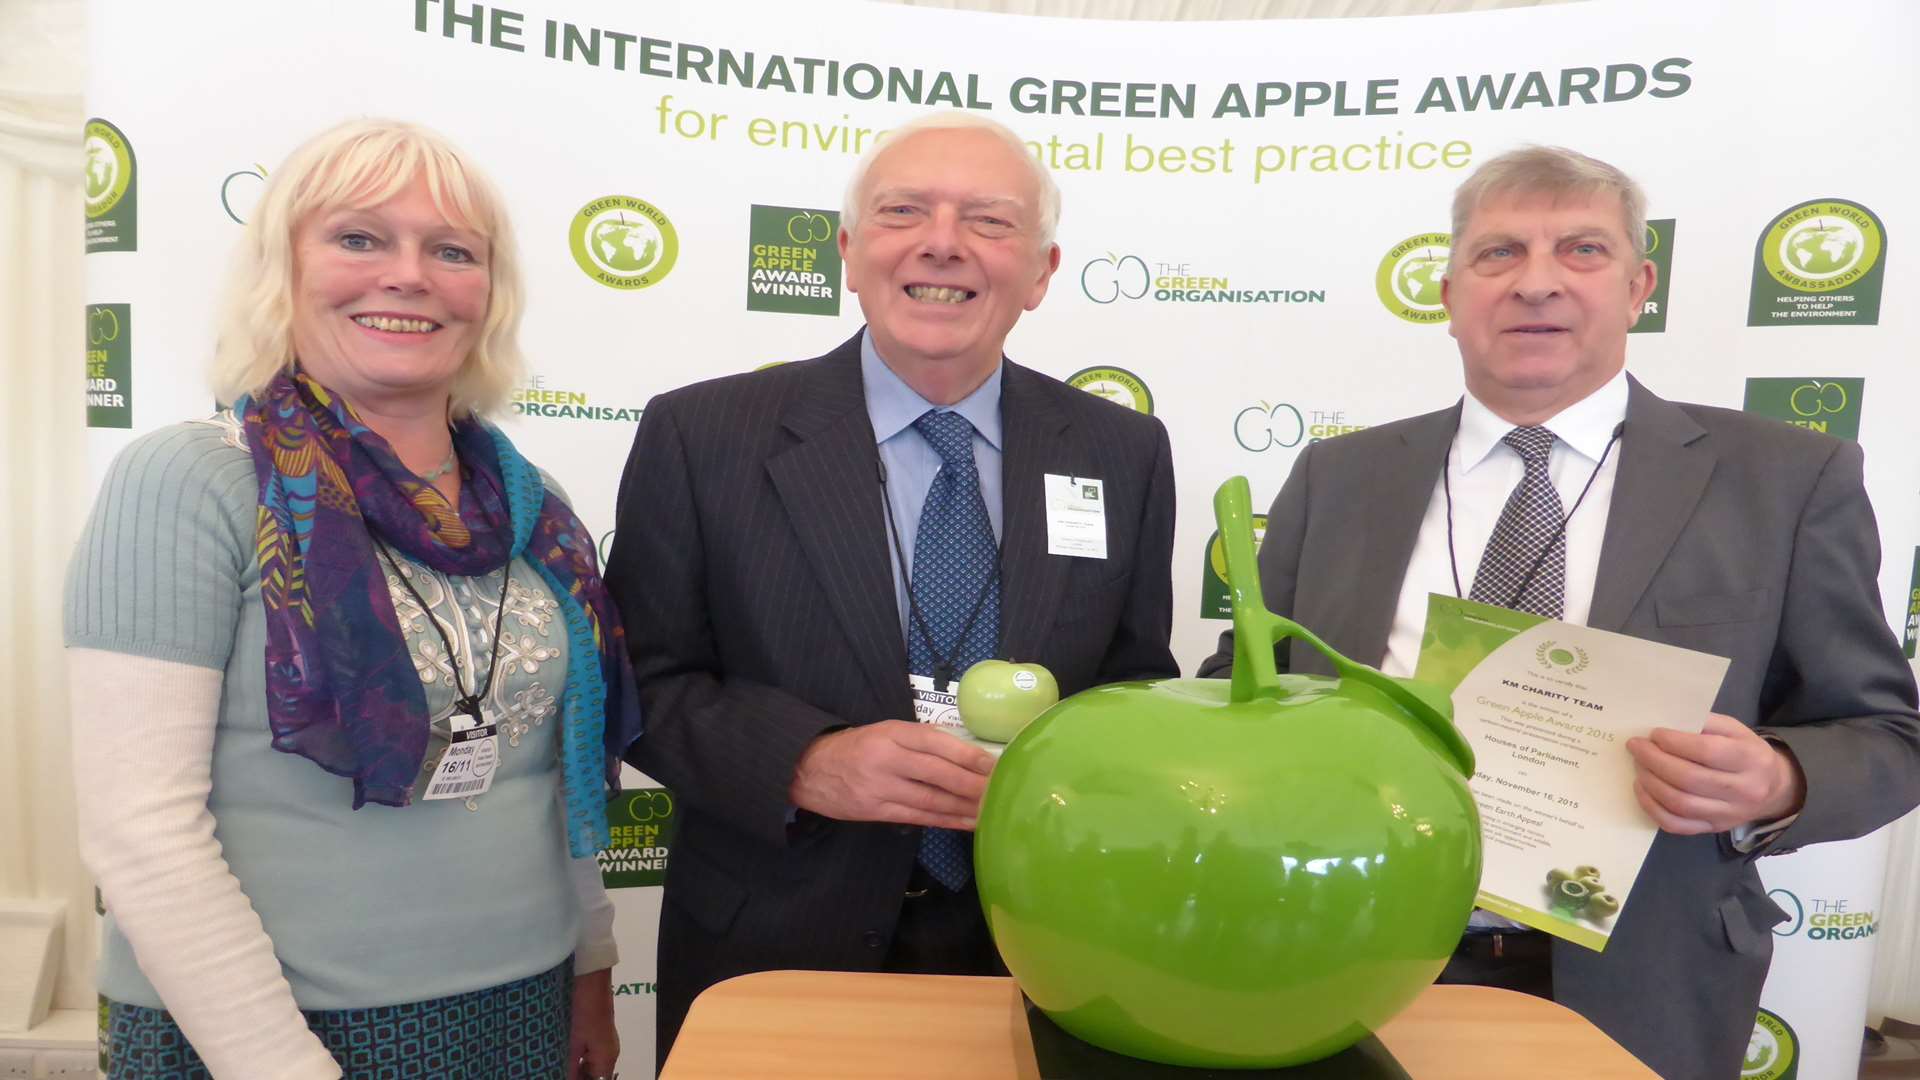 The KM Charity Team received its fifth Green Apple Award collected by trustees Gill Delahunty, Martin Vye and Alan Albert at the Houses of Parliament.